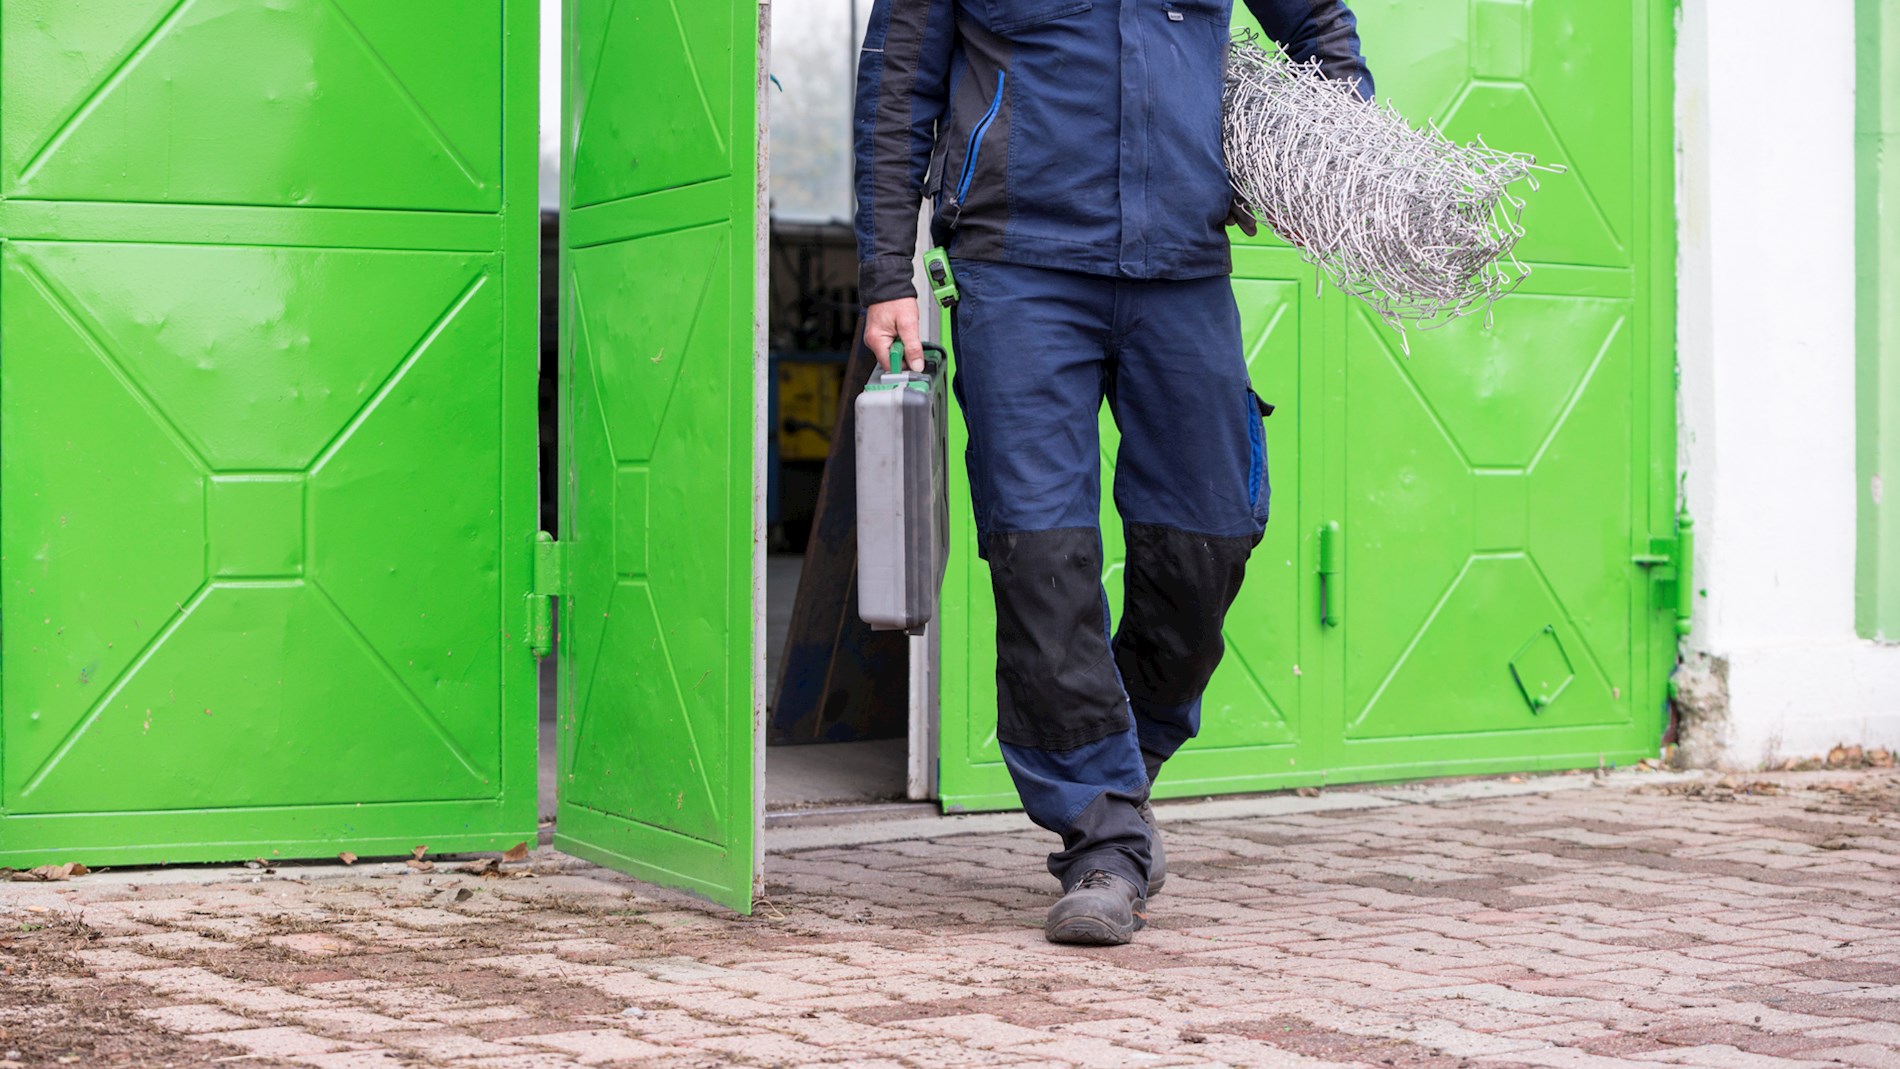 A man in blue work clothes leaves the Leo workshop through a green door. Under his left arm he carries a roll of fence wire. In his right hand a tool case.